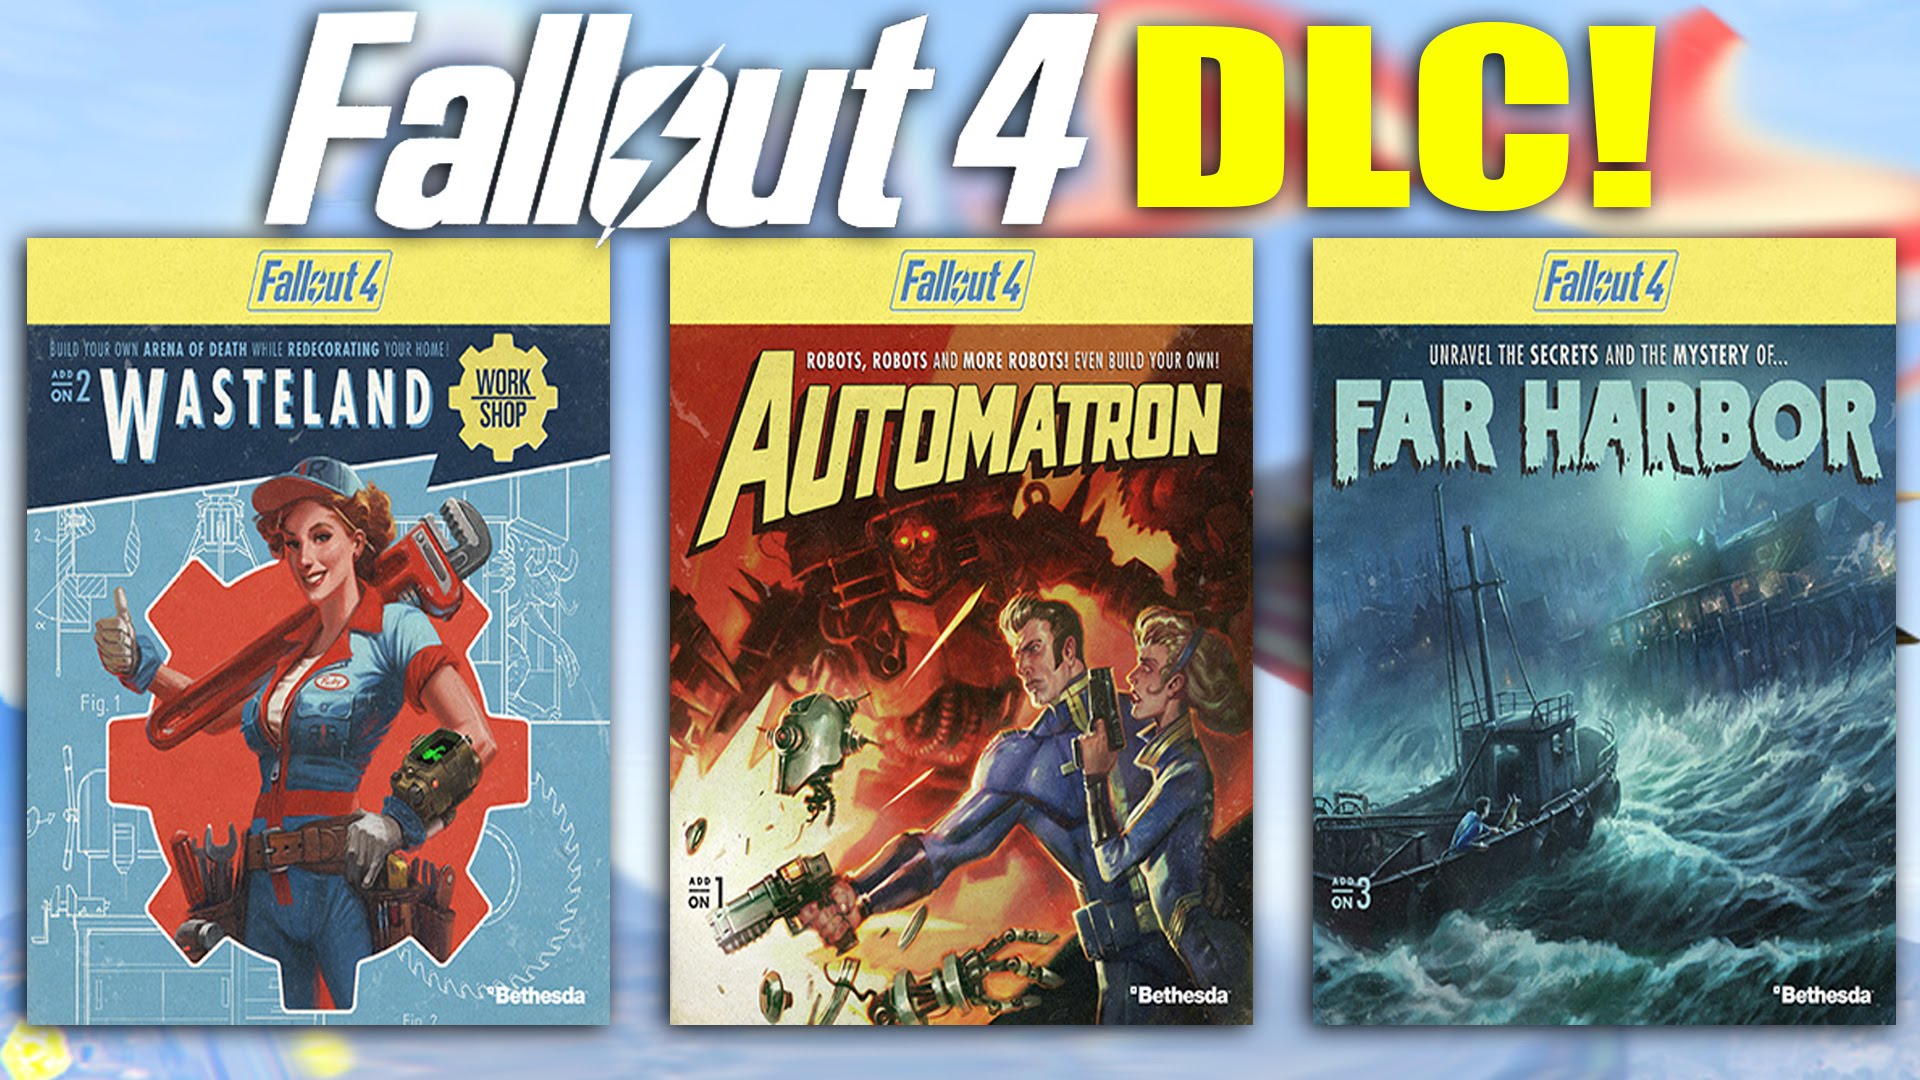 All-3-Added-DLCs-of-Fallout-4